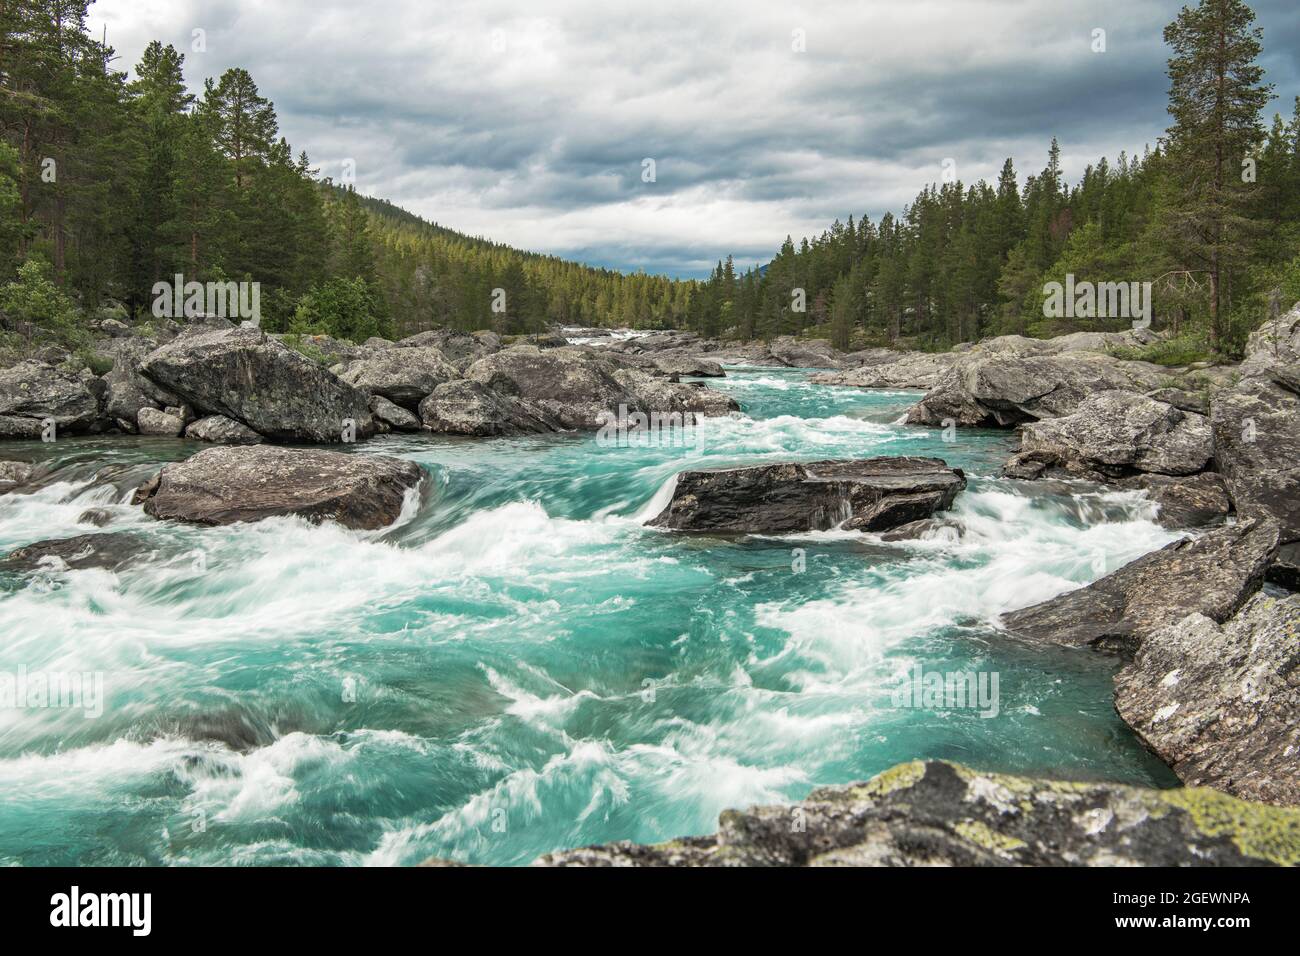 Rushing Scenic Turquoise River in Vestland County of Norway. Summer Landscape. Stock Photo